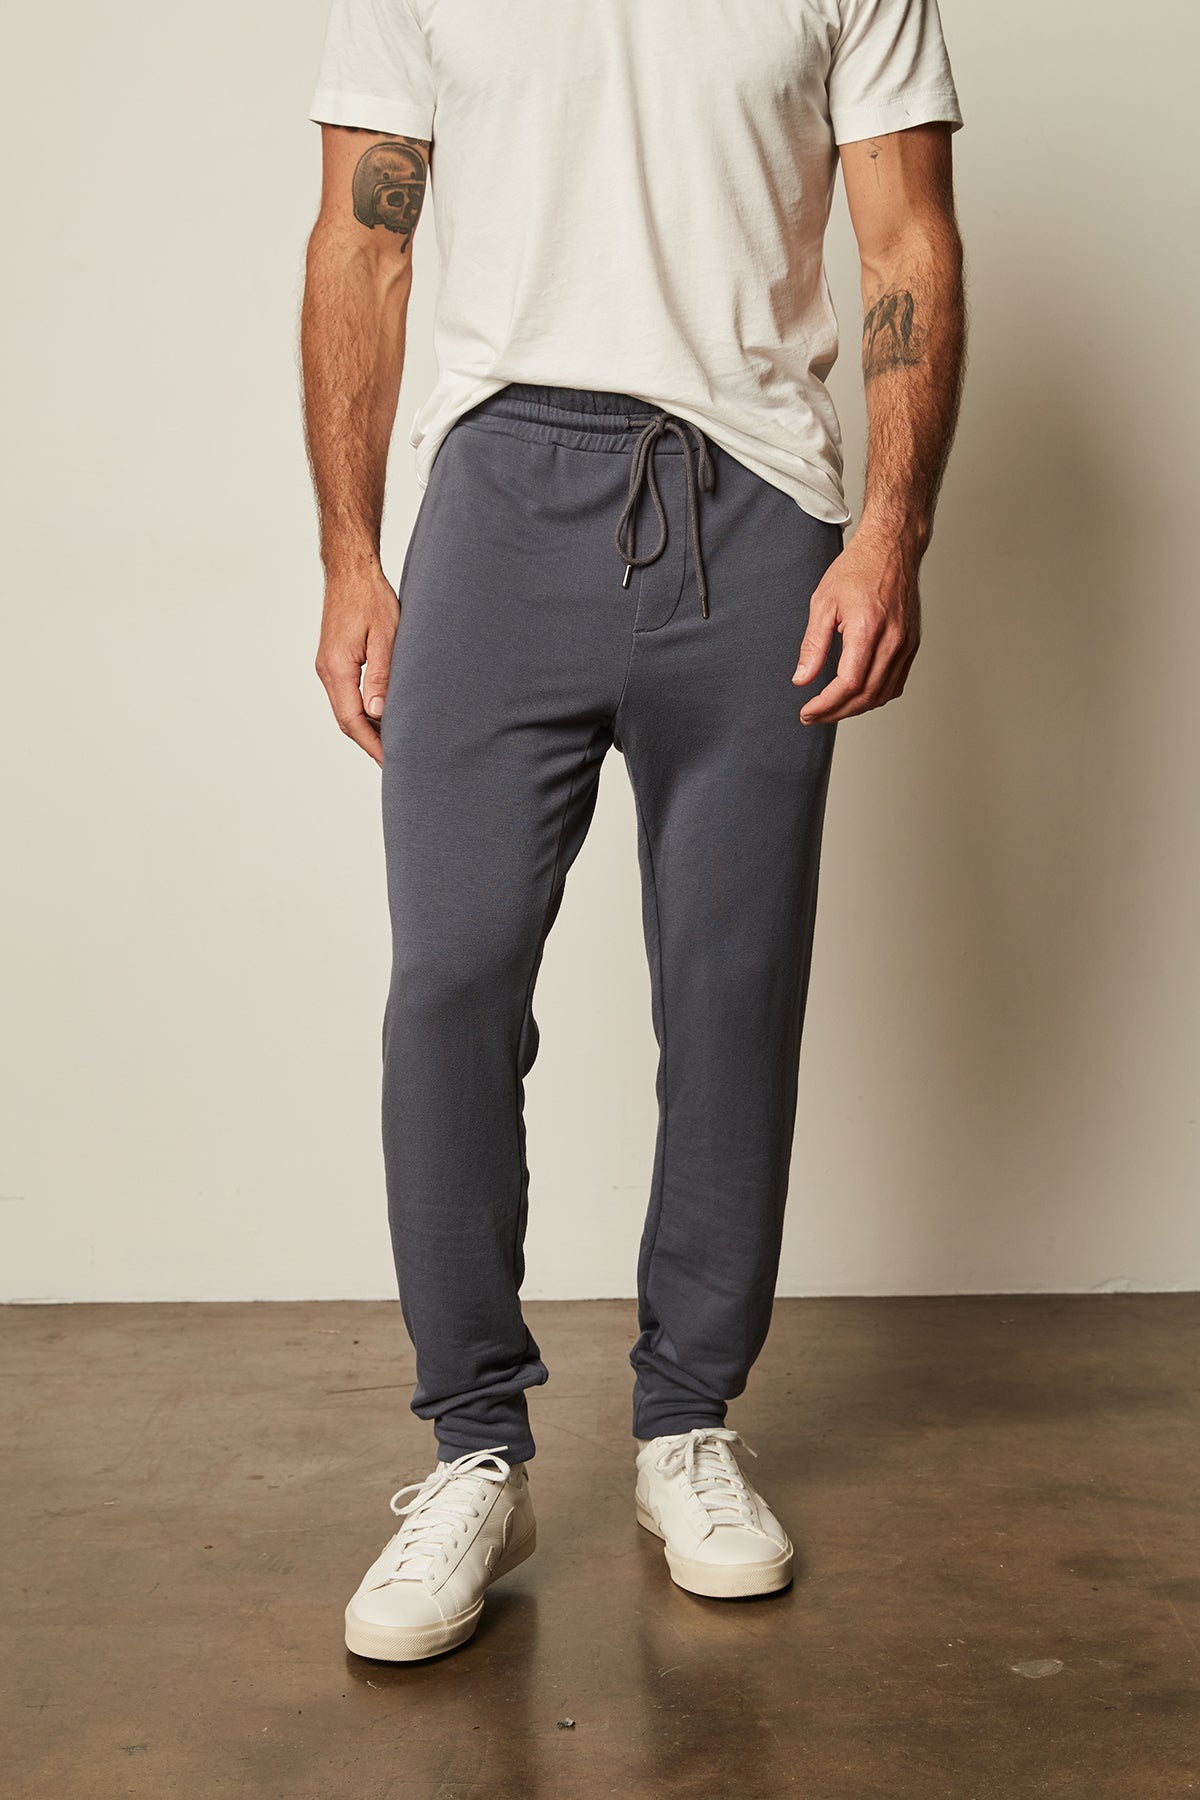 A man wearing Crosby Luxe Fleece Jogger sweatpants by Velvet by Graham & Spencer and a white t-shirt for workouts.-26630189252801